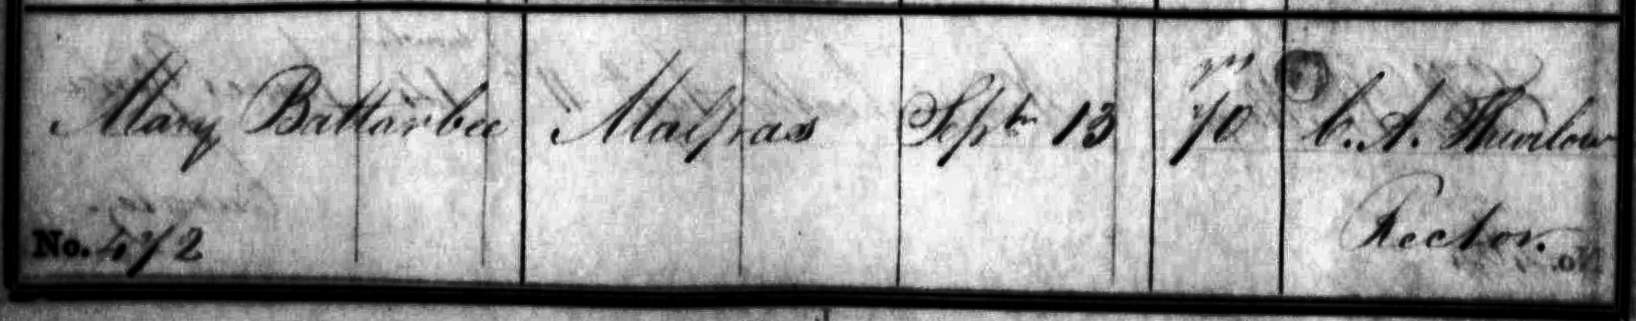 Taken on September 13th, 1843 in Malpas and sourced from Burial Rocords - Malpas.